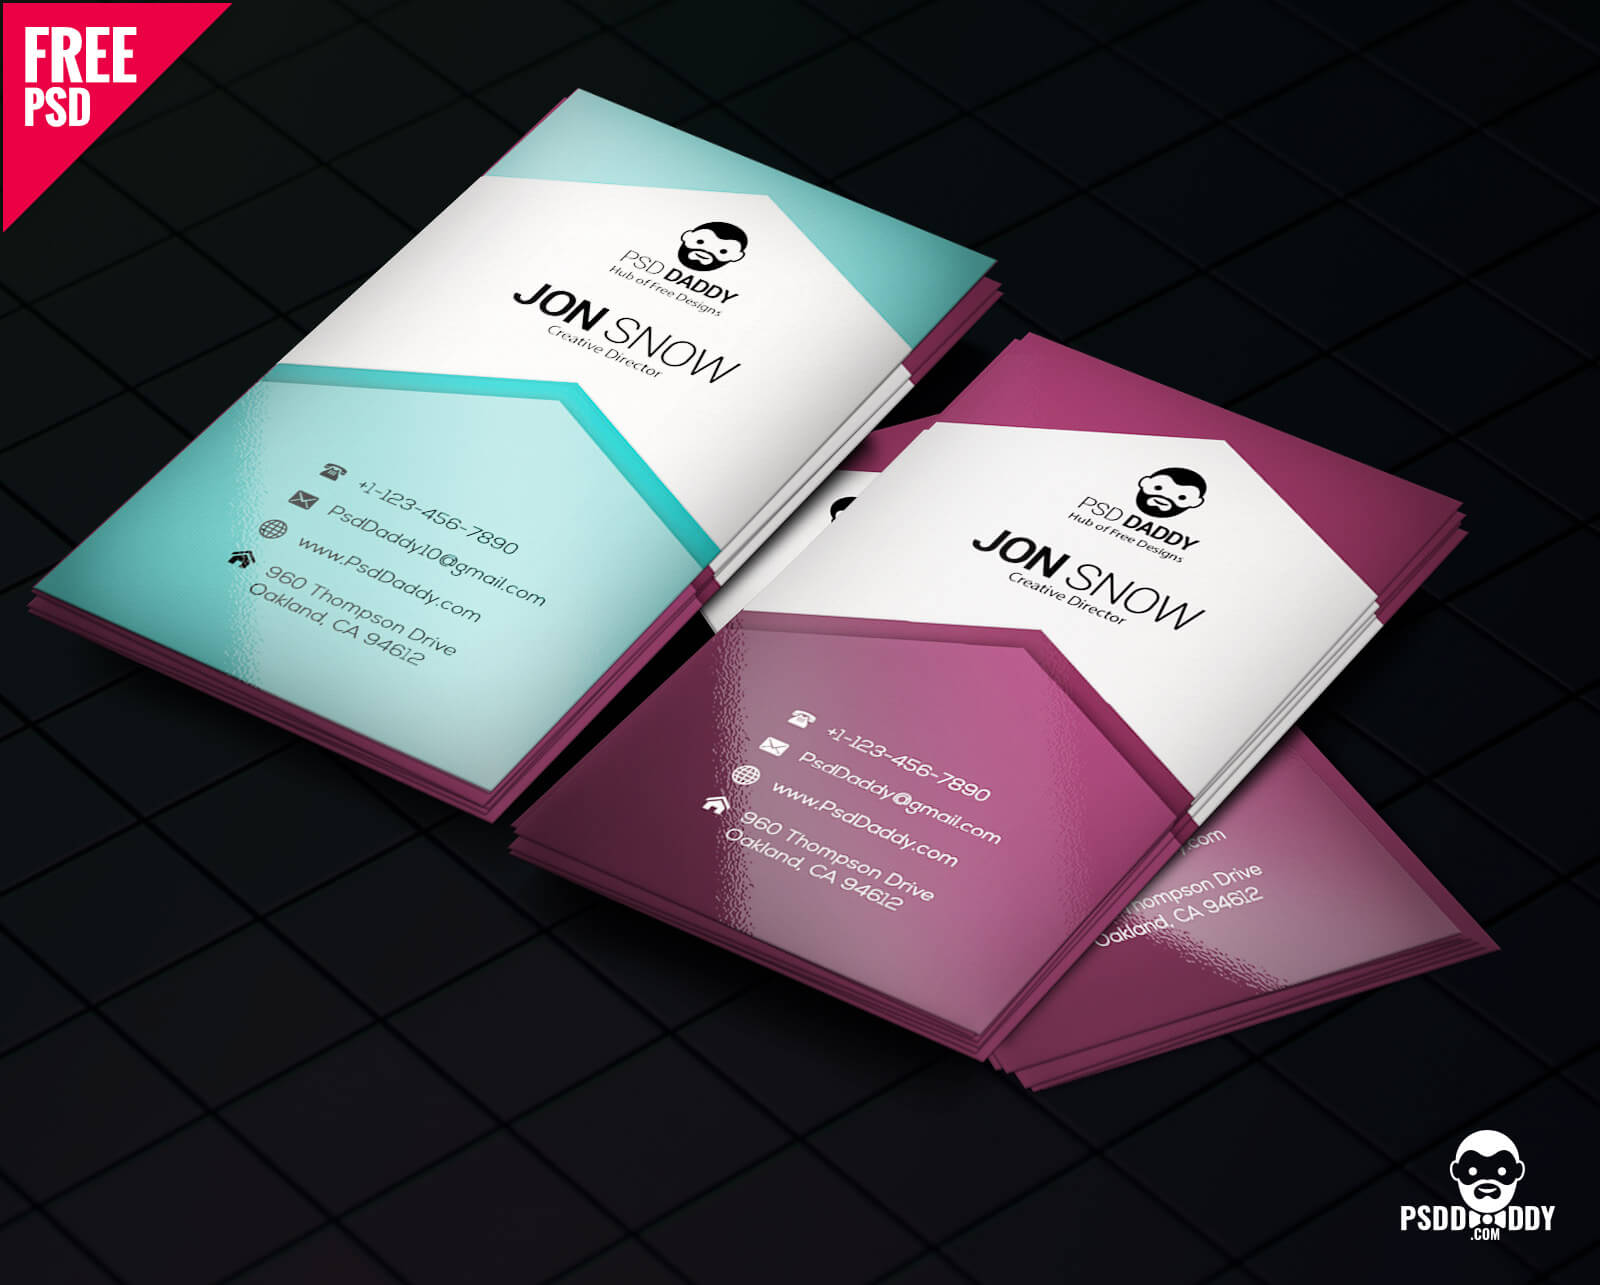 Download]Creative Business Card Psd Free | Psddaddy For Business Card Size Template Photoshop